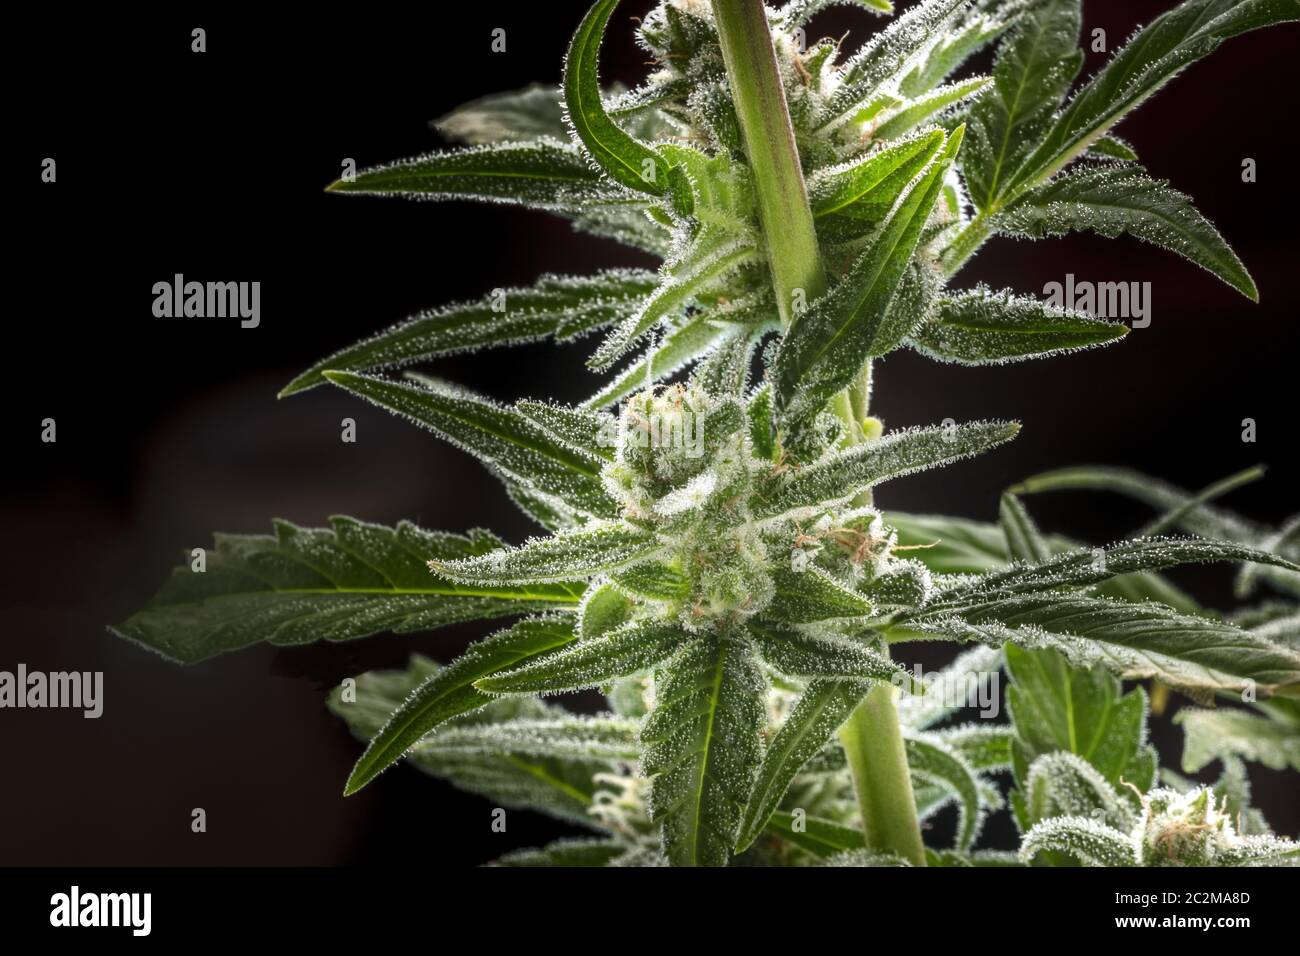 A close-up of flowering cannabis buds with stigmas and trichomes before harvest, macro shot on a black bakground Stock Photo